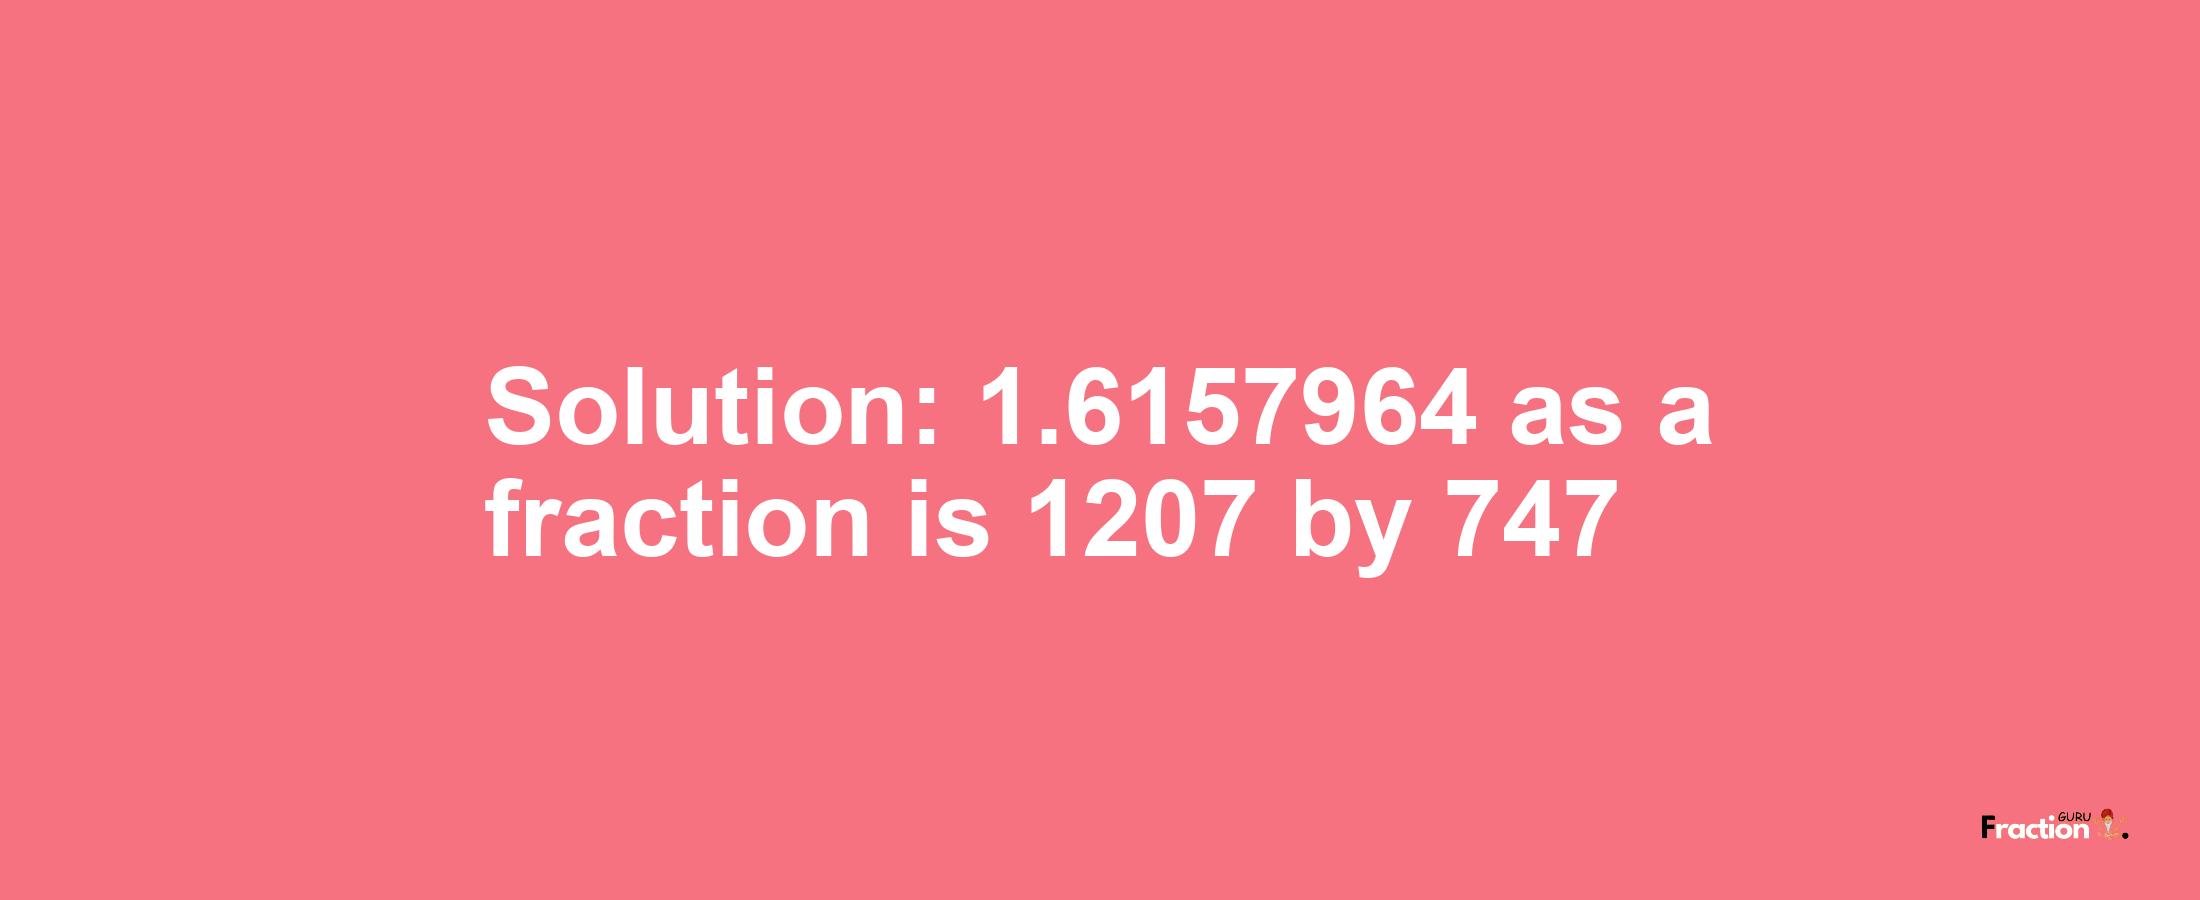 Solution:1.6157964 as a fraction is 1207/747